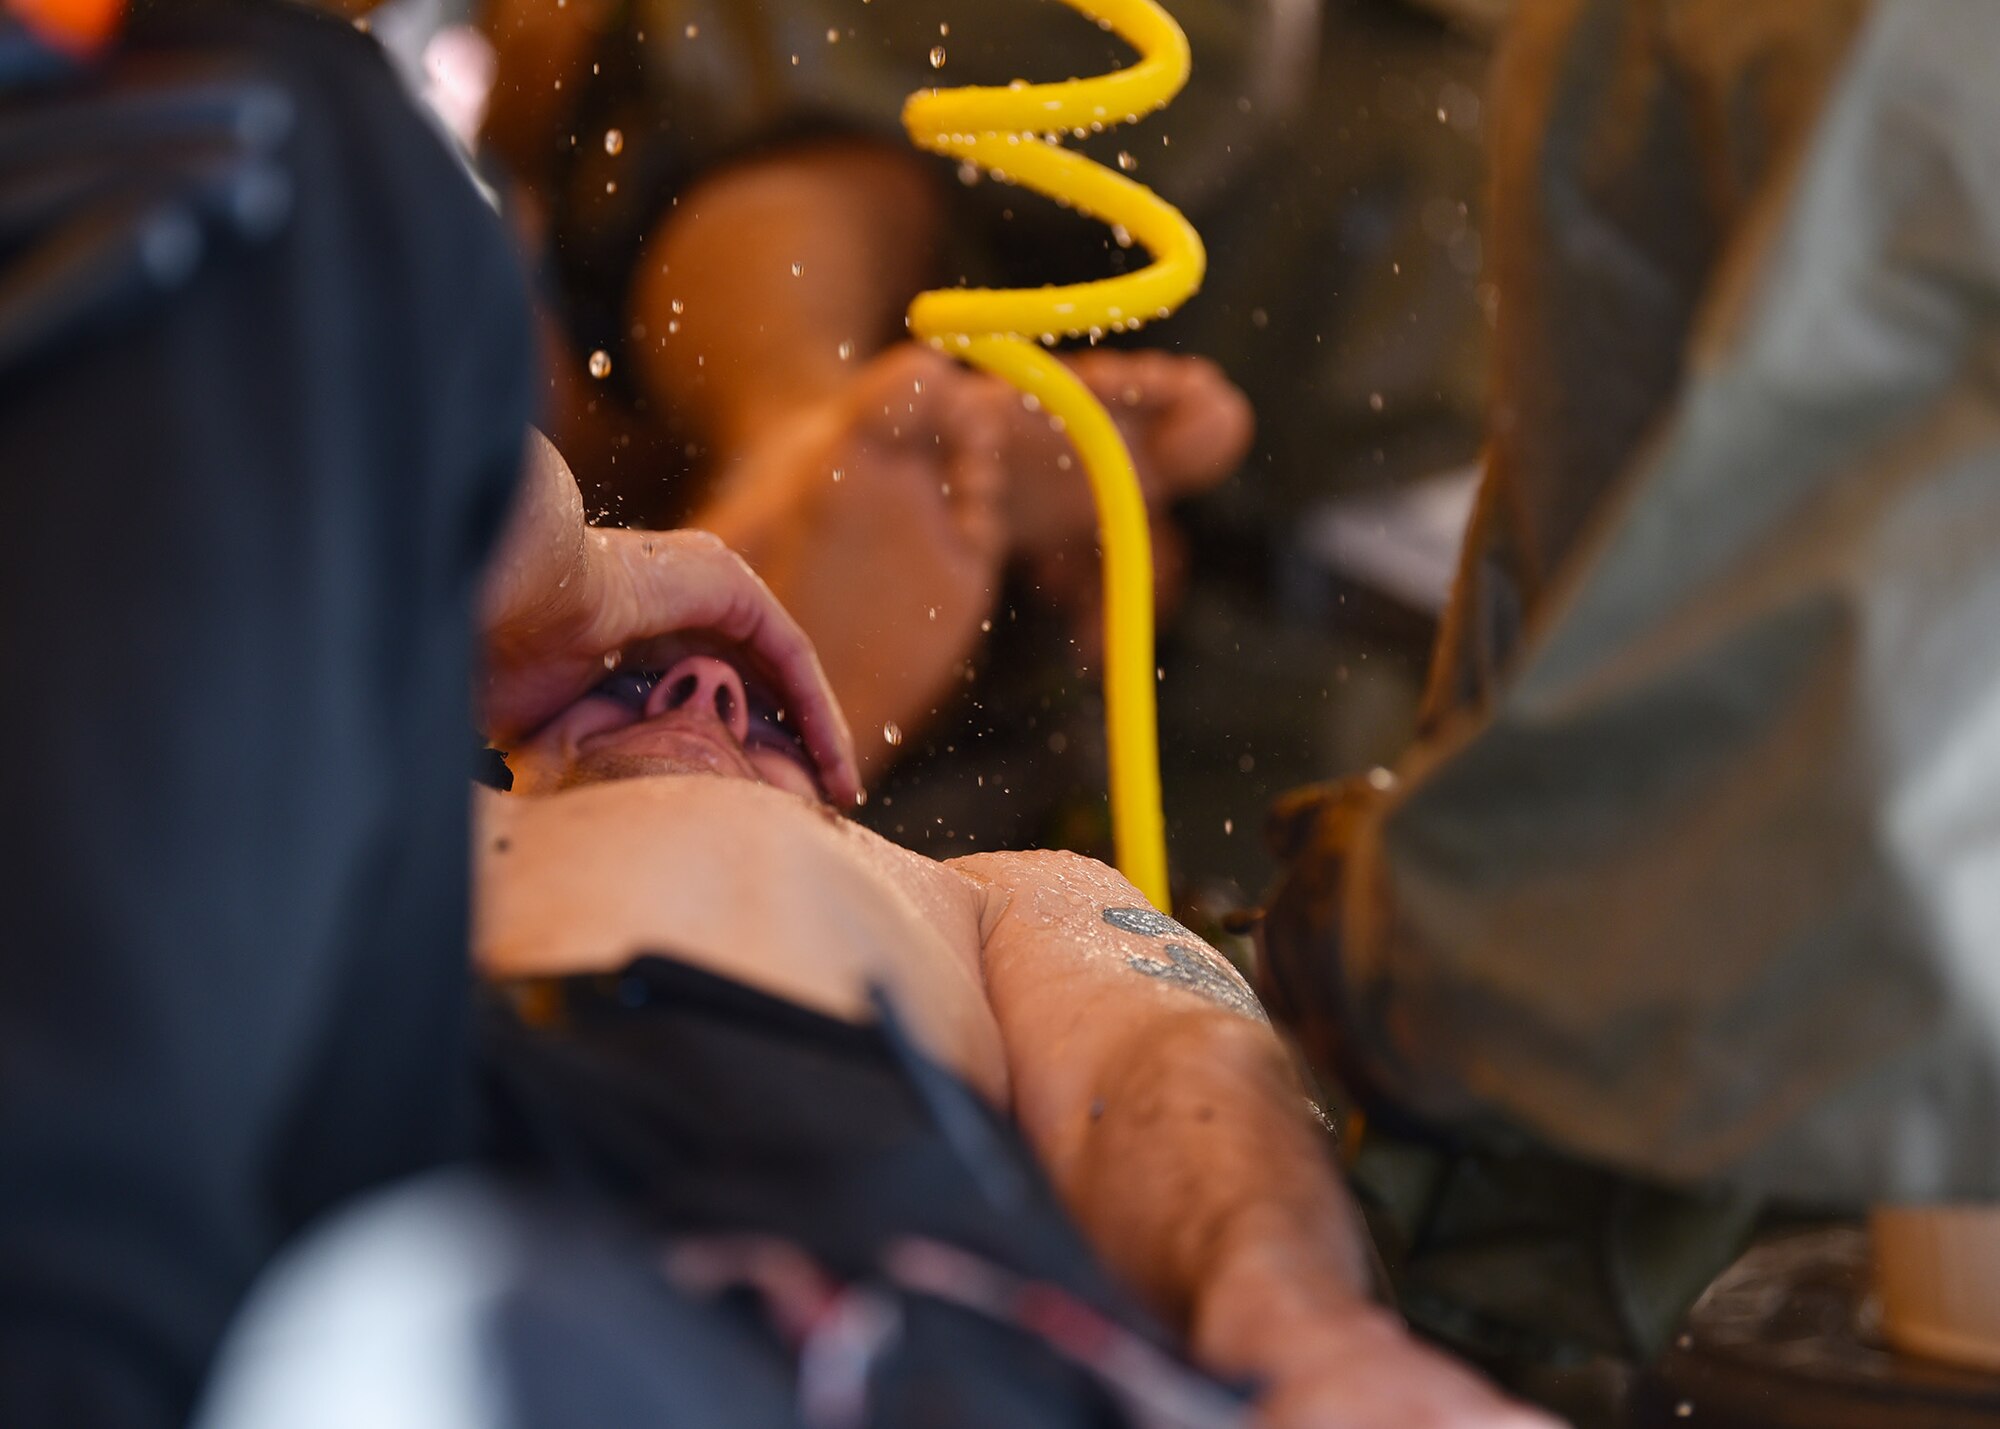 Airmen assigned to the 7th Medical Group decontaminate a simulated medical patient during a chemical, biological, radiological, and nuclear exercise at Dyess Air Force Base, Texas, March 6, 2020. Both Dyess Airmen and Abilene Christian University students volunteered as simulated medical patients to provide a sense of realism for the responding agencies. (U.S. Air Force photo by Airman 1st Class Sophia Robello)